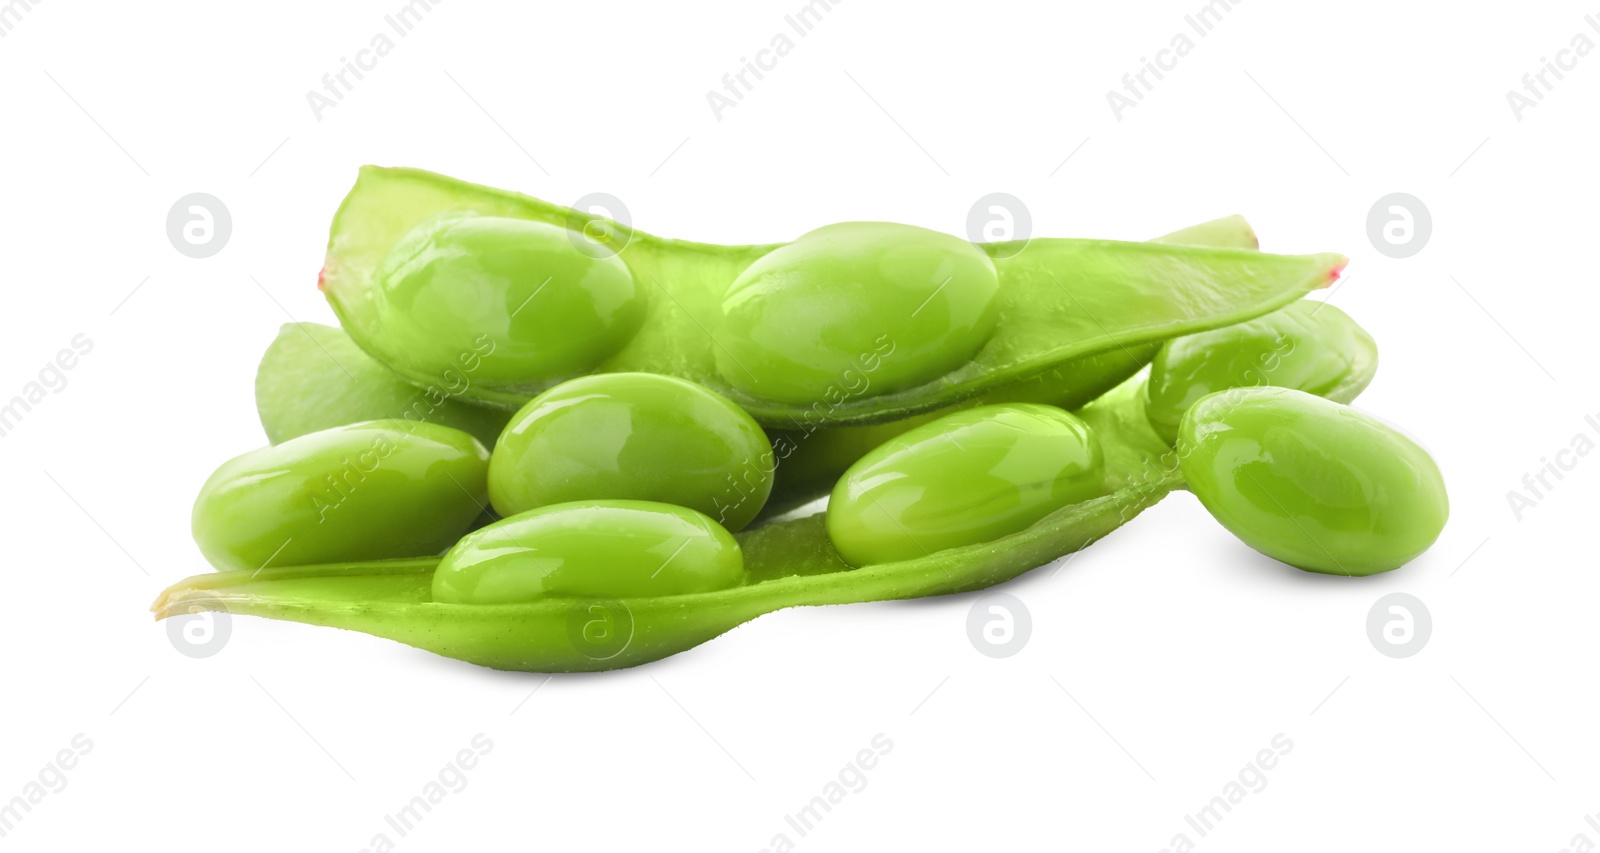 Photo of Fresh green edamame pods and beans on white background